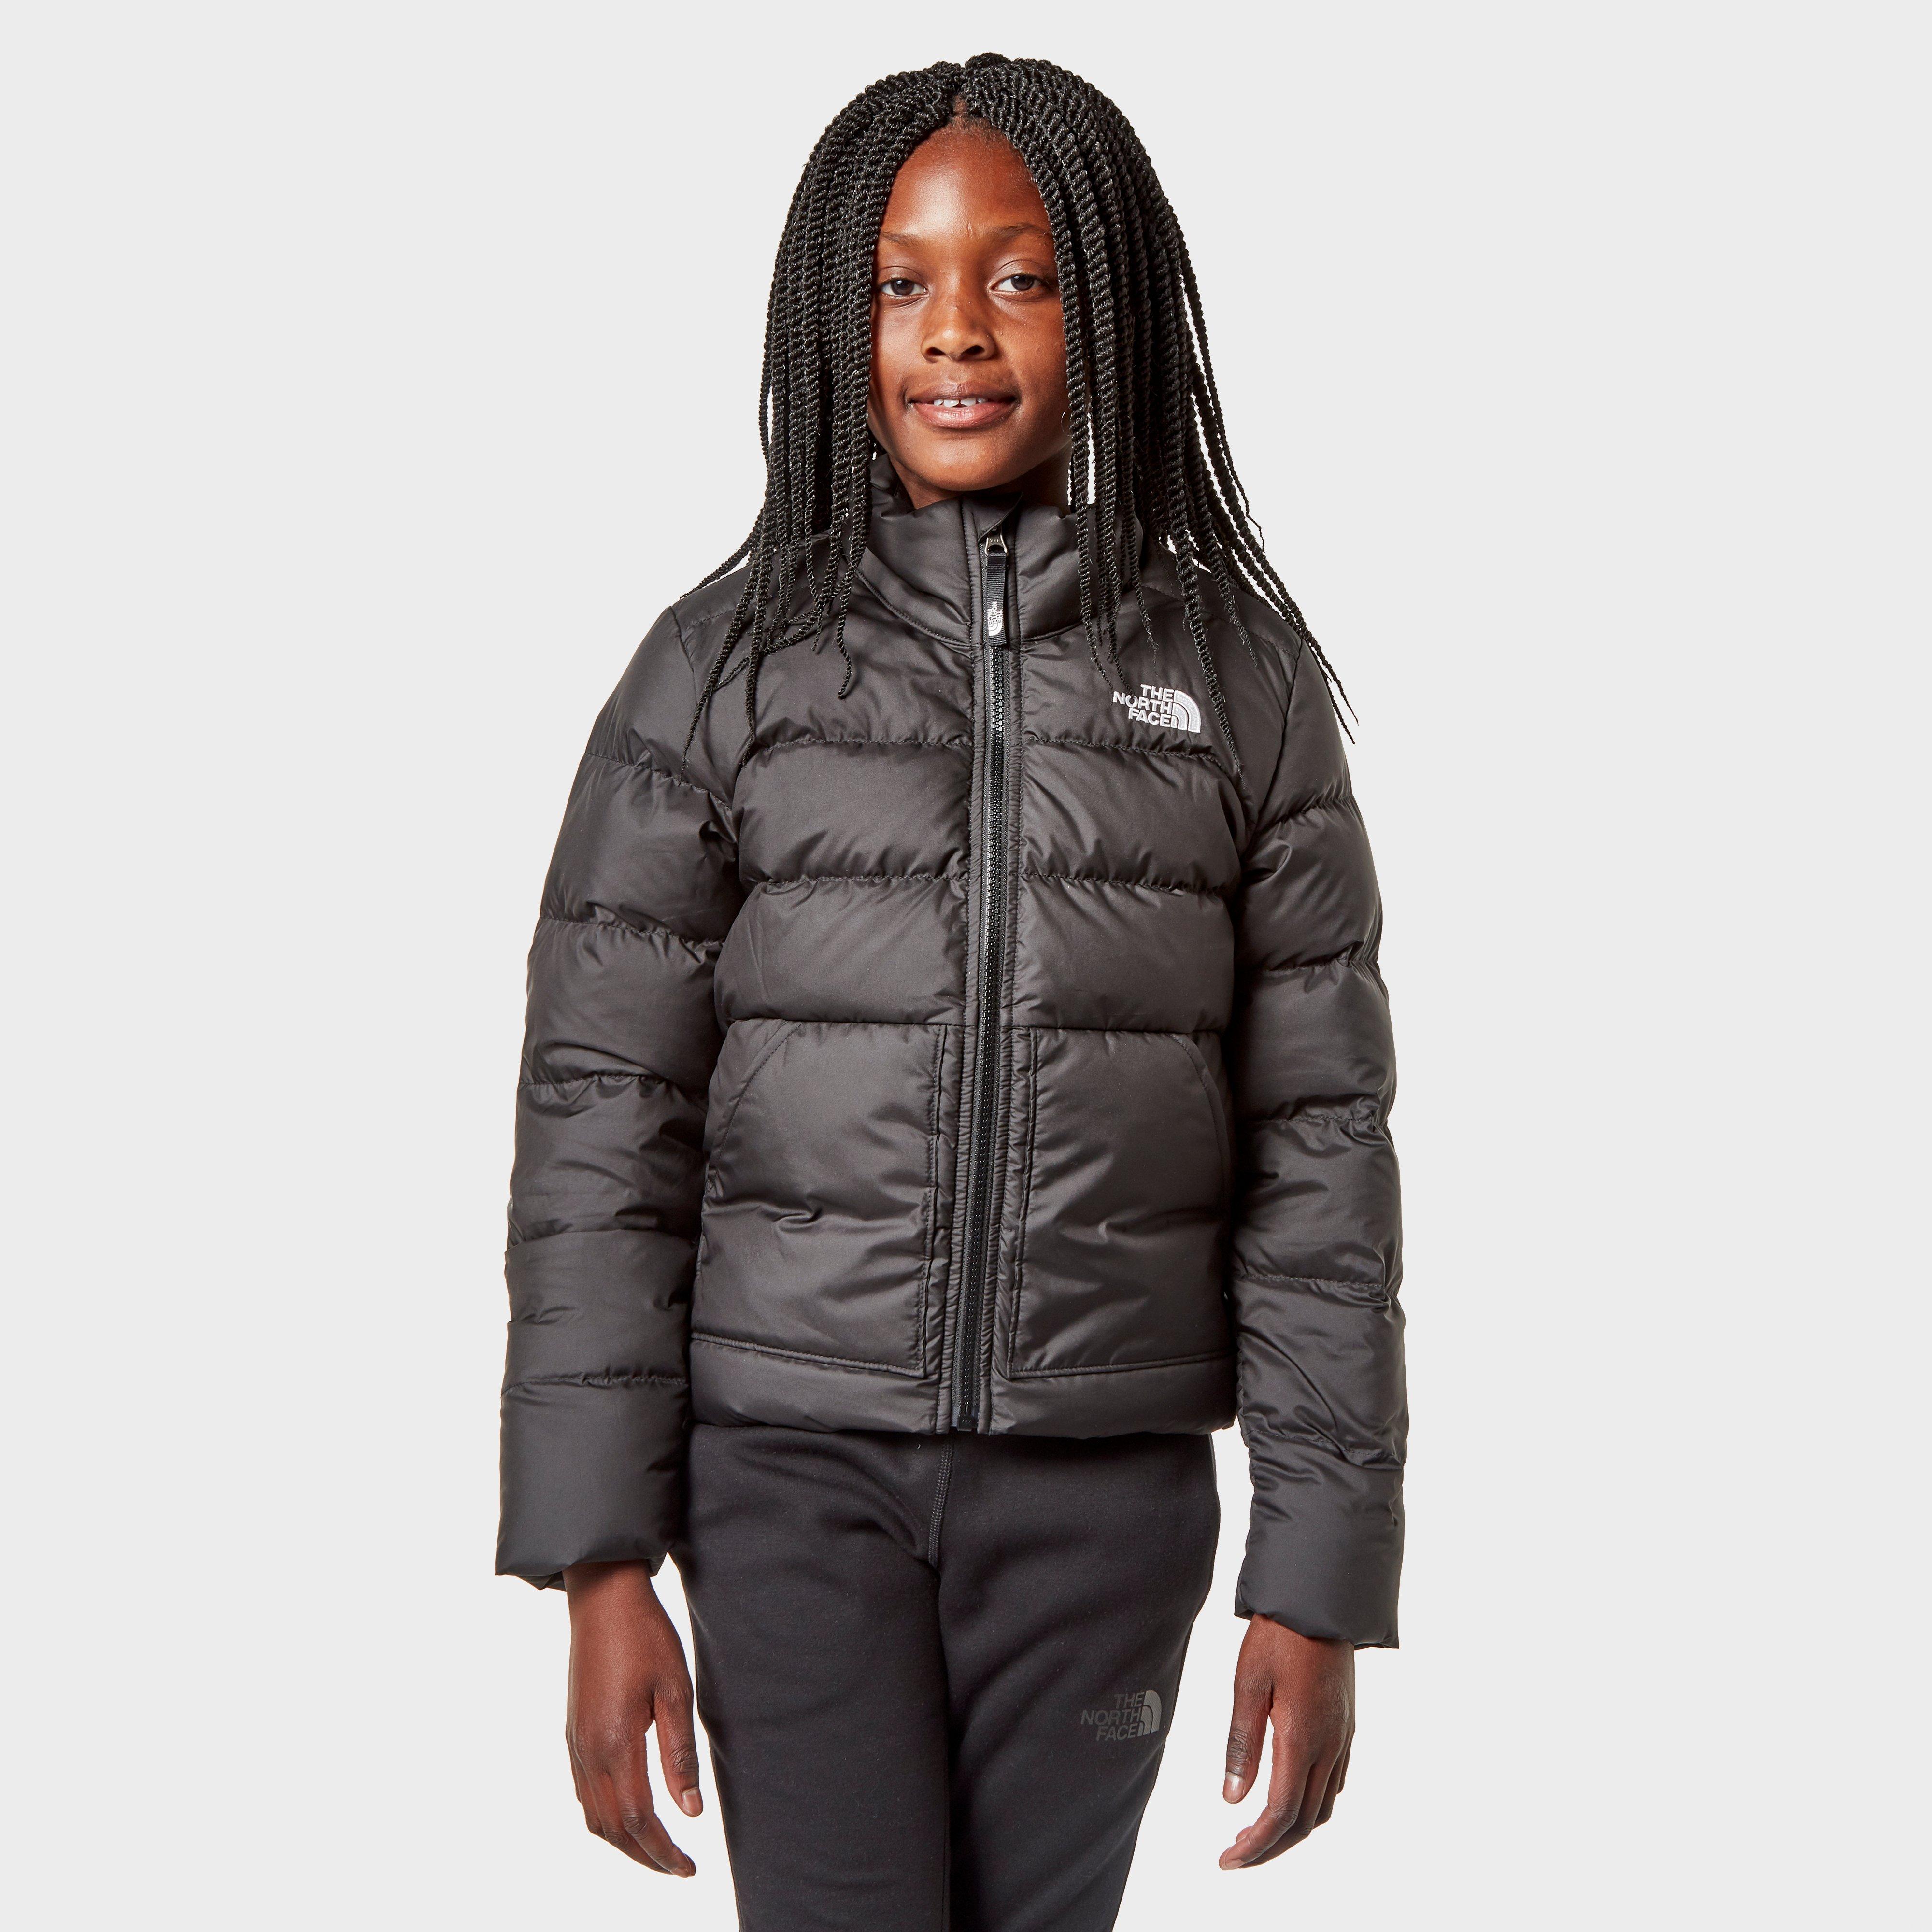 north face girls andes jacket